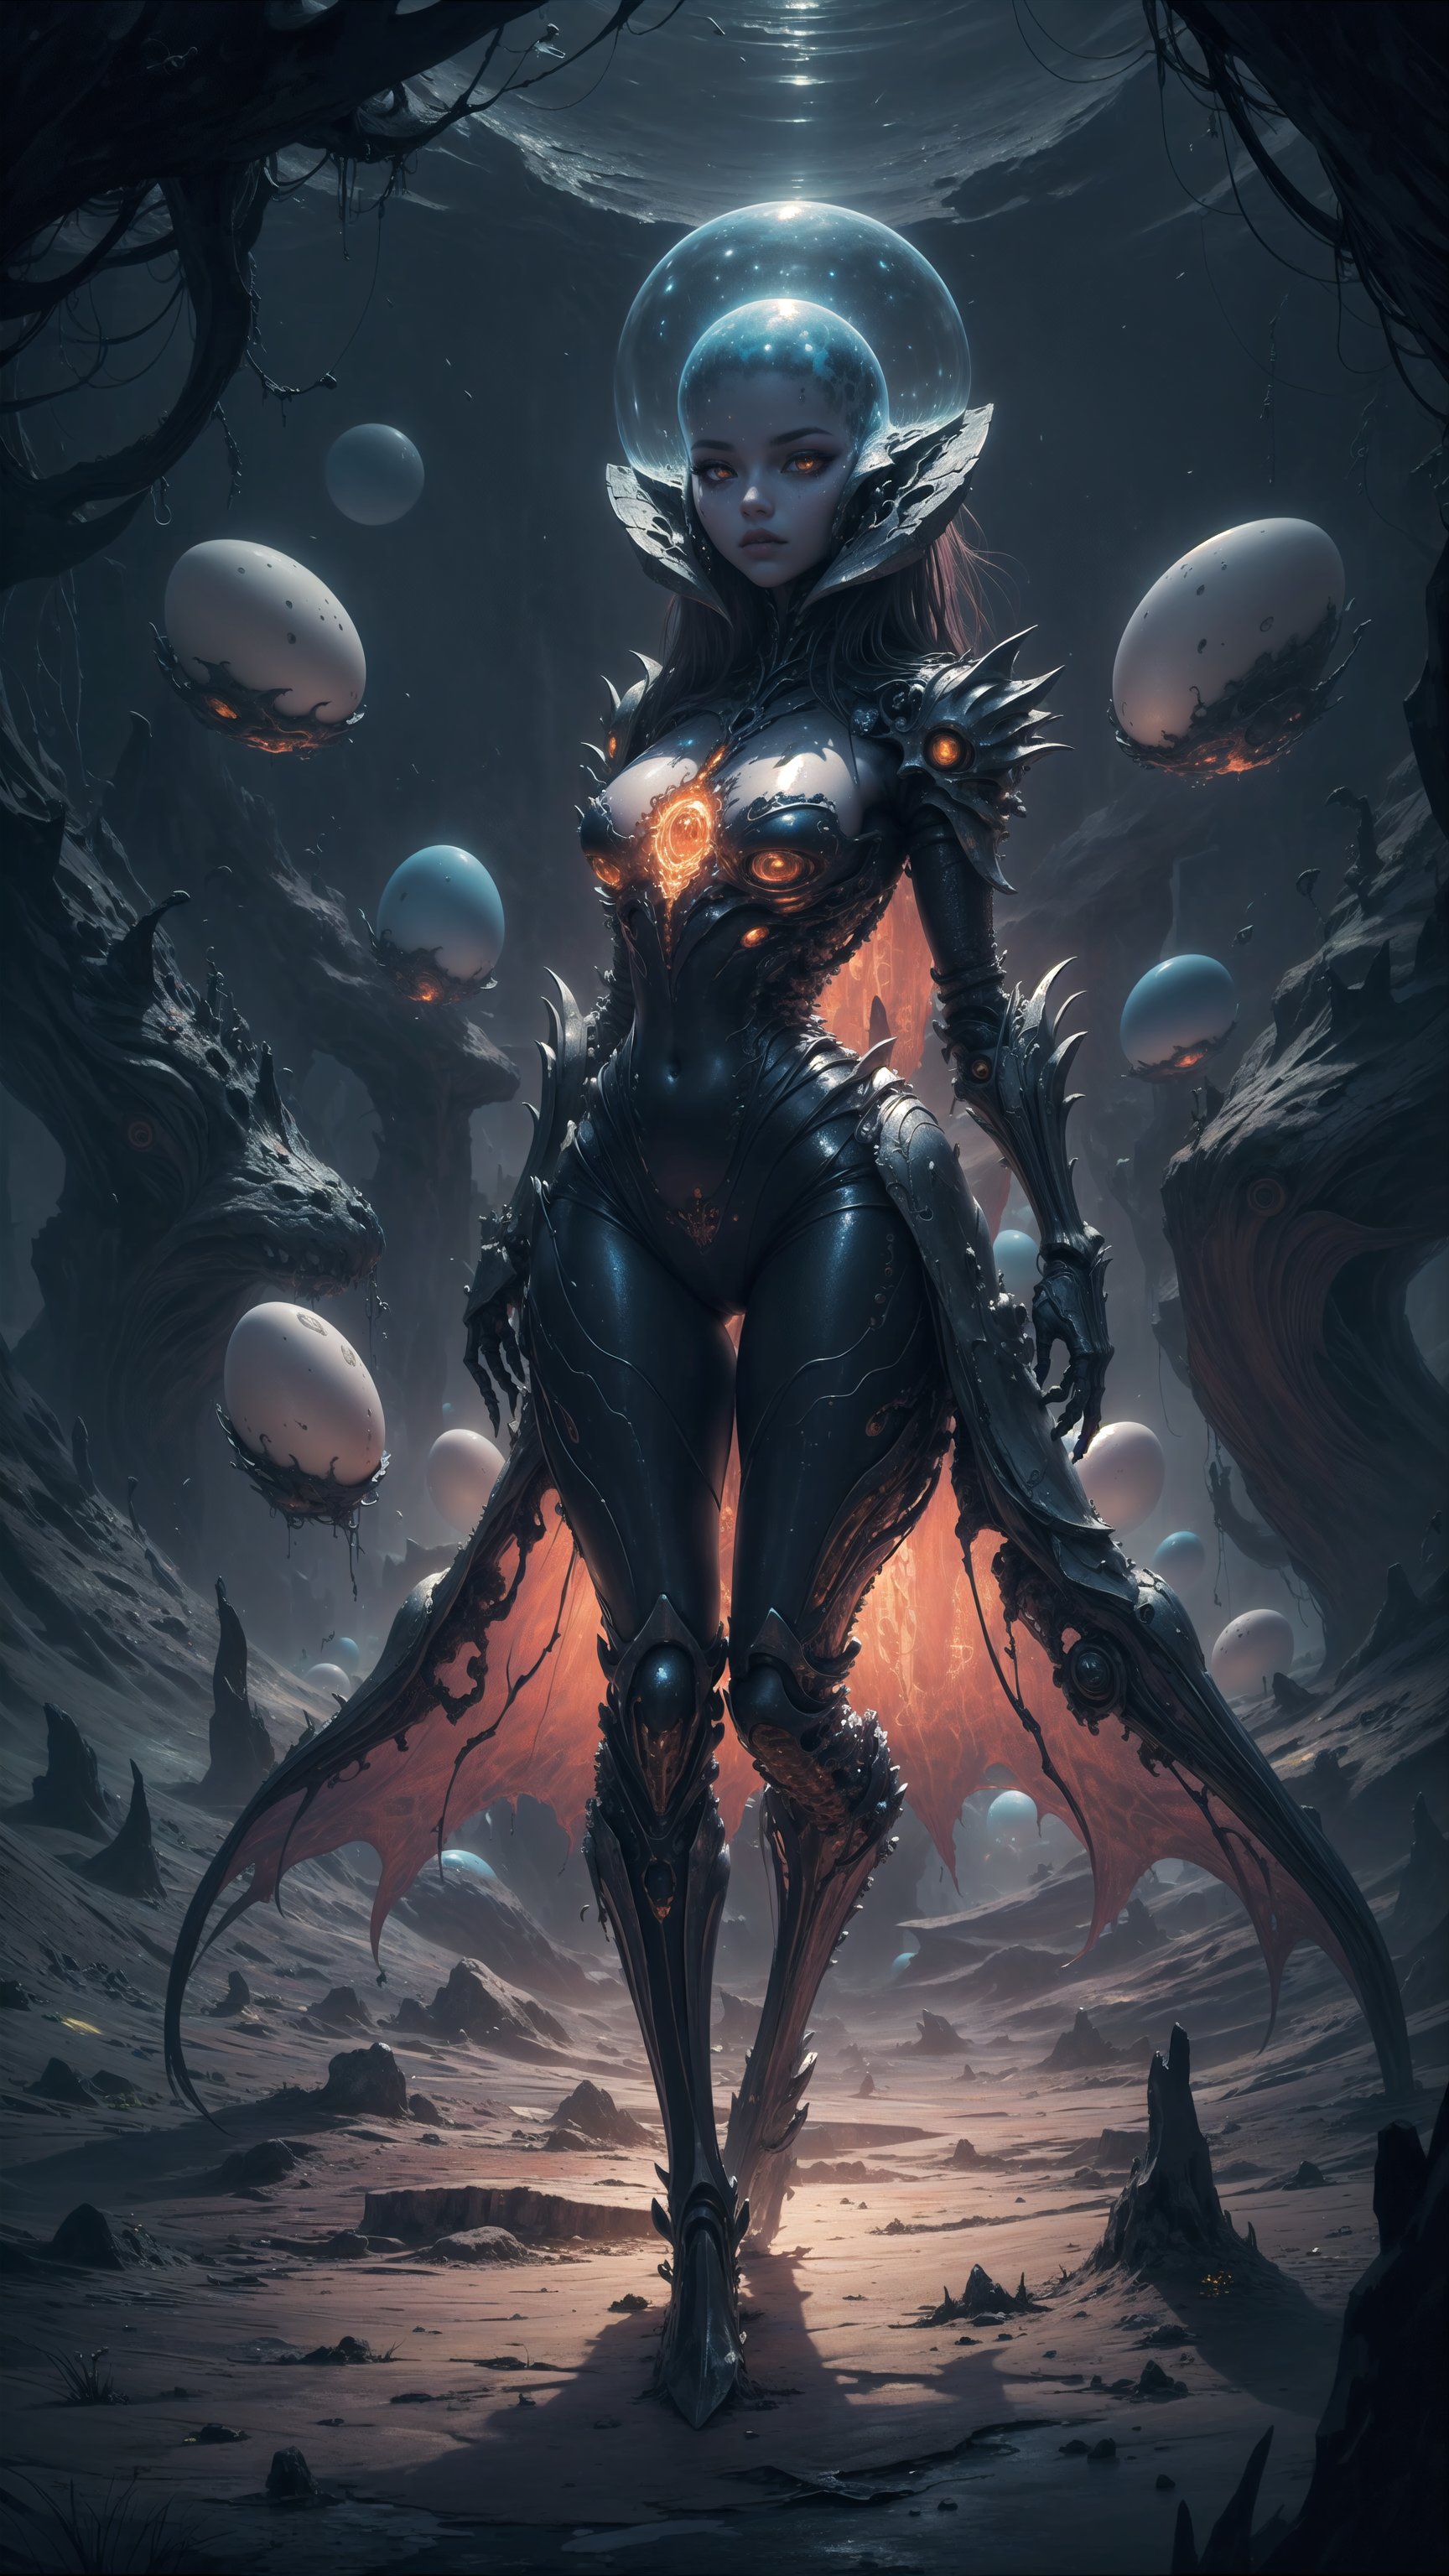 "painting, soft yet detailed, an alien queen in an ethereal biomechanical landscape, surrounded by semi-translucent alien eggs, muted and mysterious color palette, delicate brush strokes depicting her intricate bio-armor and alien features, soft glow emanating from the eggs, sense of alien royalty and mystique, impressionistic yet detailed portrayal, harmonious and otherworldly atmosphere" full body,cosmiclandscapes,alien landscape,More Detail